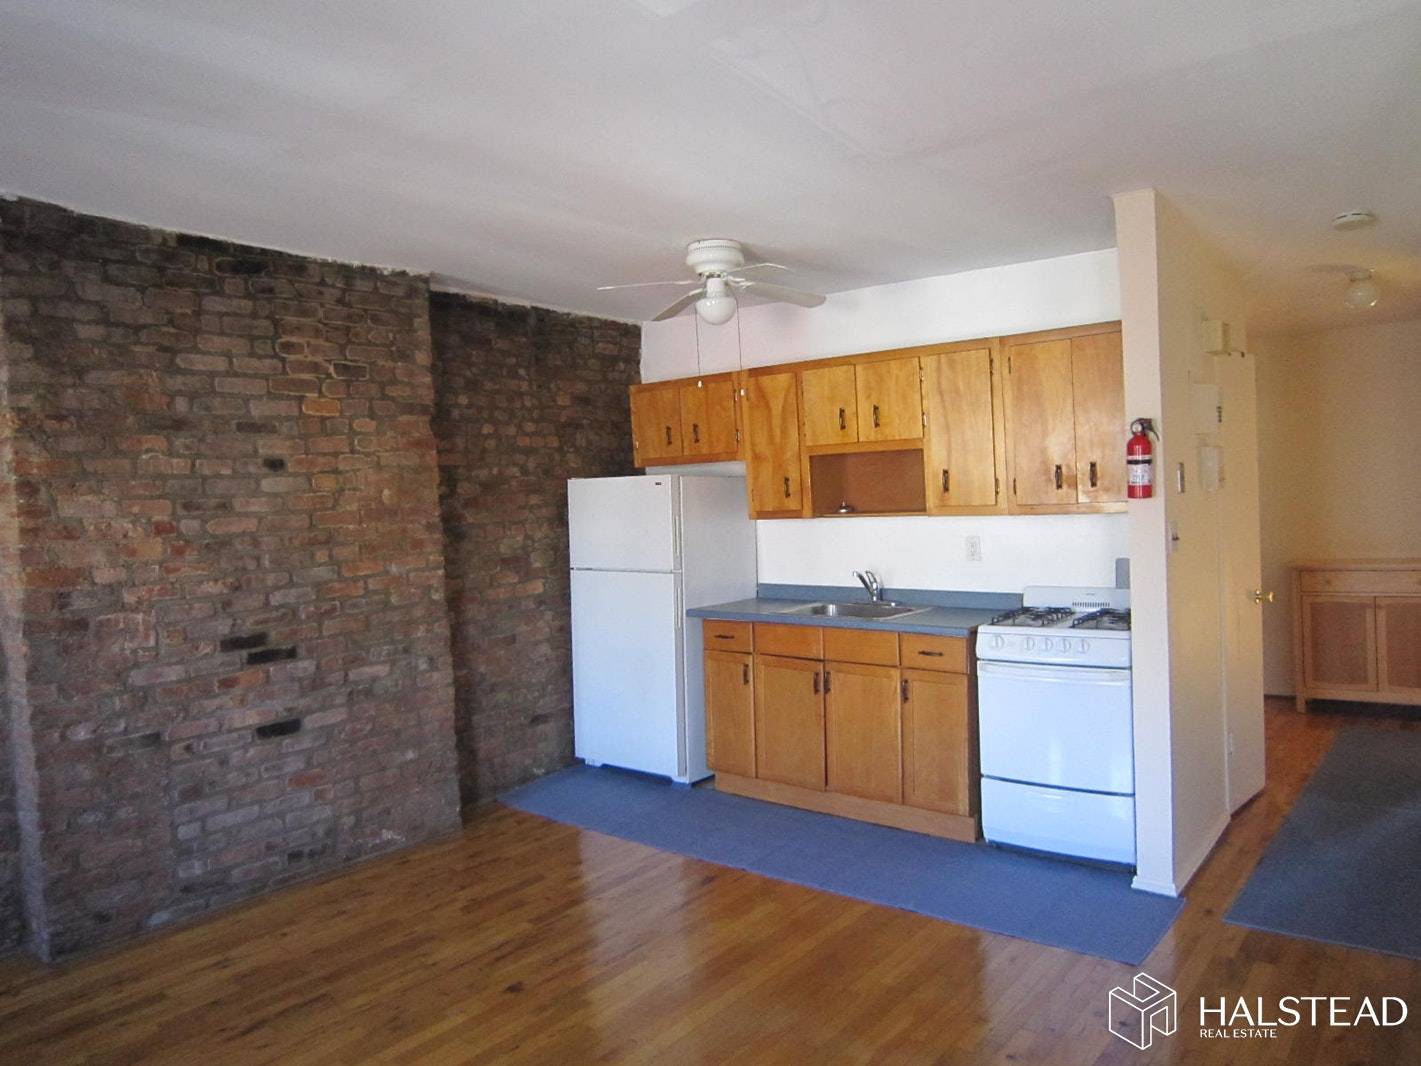 Welcome to this spacious and sunny two bedroom apartment in vibrant Boerum Hill.